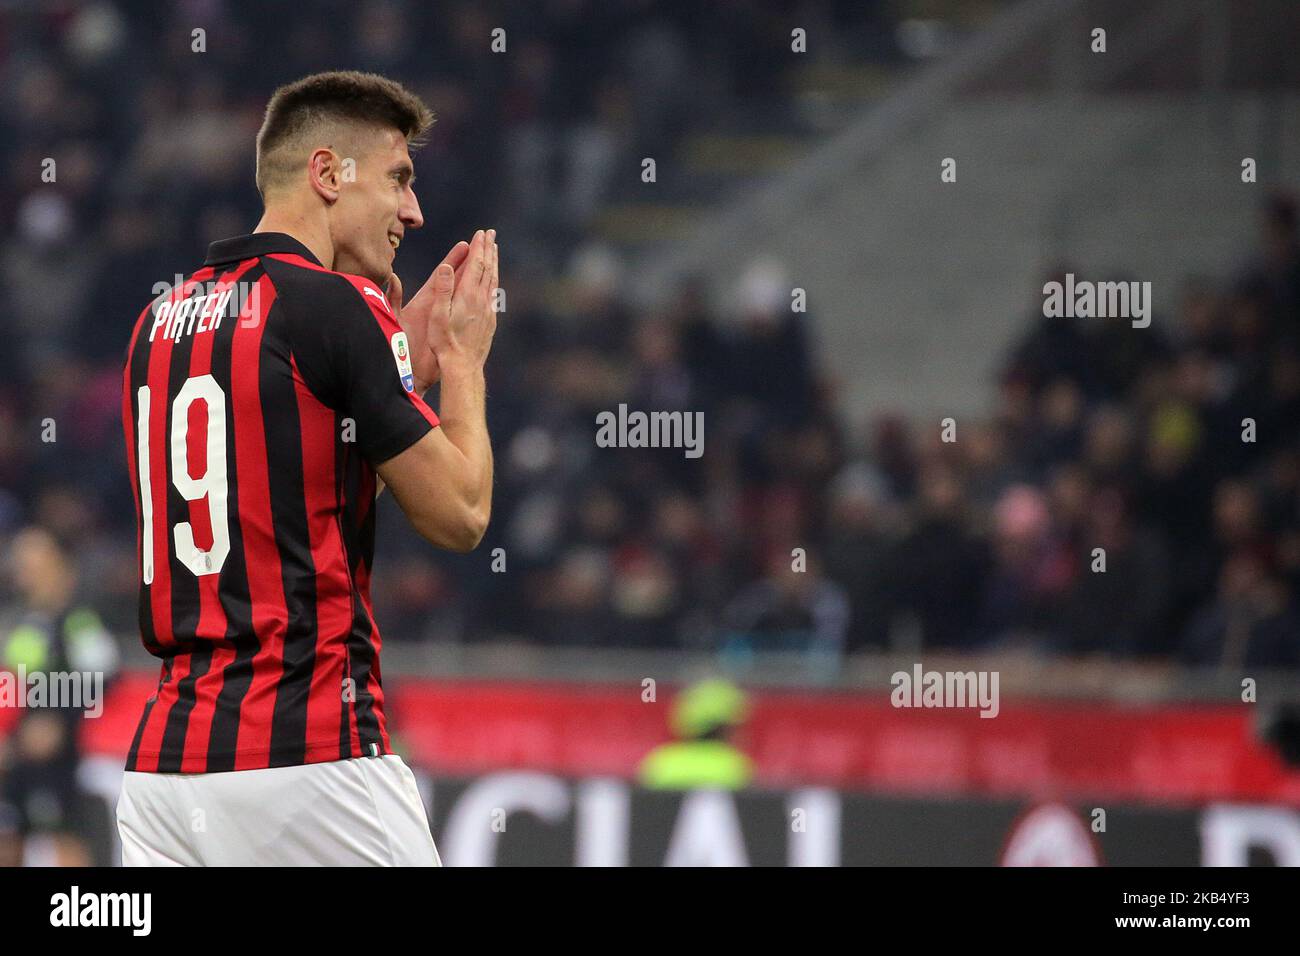 Krzysztof Piatek #19 of AC Milan reacts to a missed chance during the serie A match between AC Milan and SSC Napoli at Stadio Giuseppe Meazza on January 26, 2018 in Milan, Italy. (Photo by Giuseppe Cottini/NurPhoto) Stock Photo